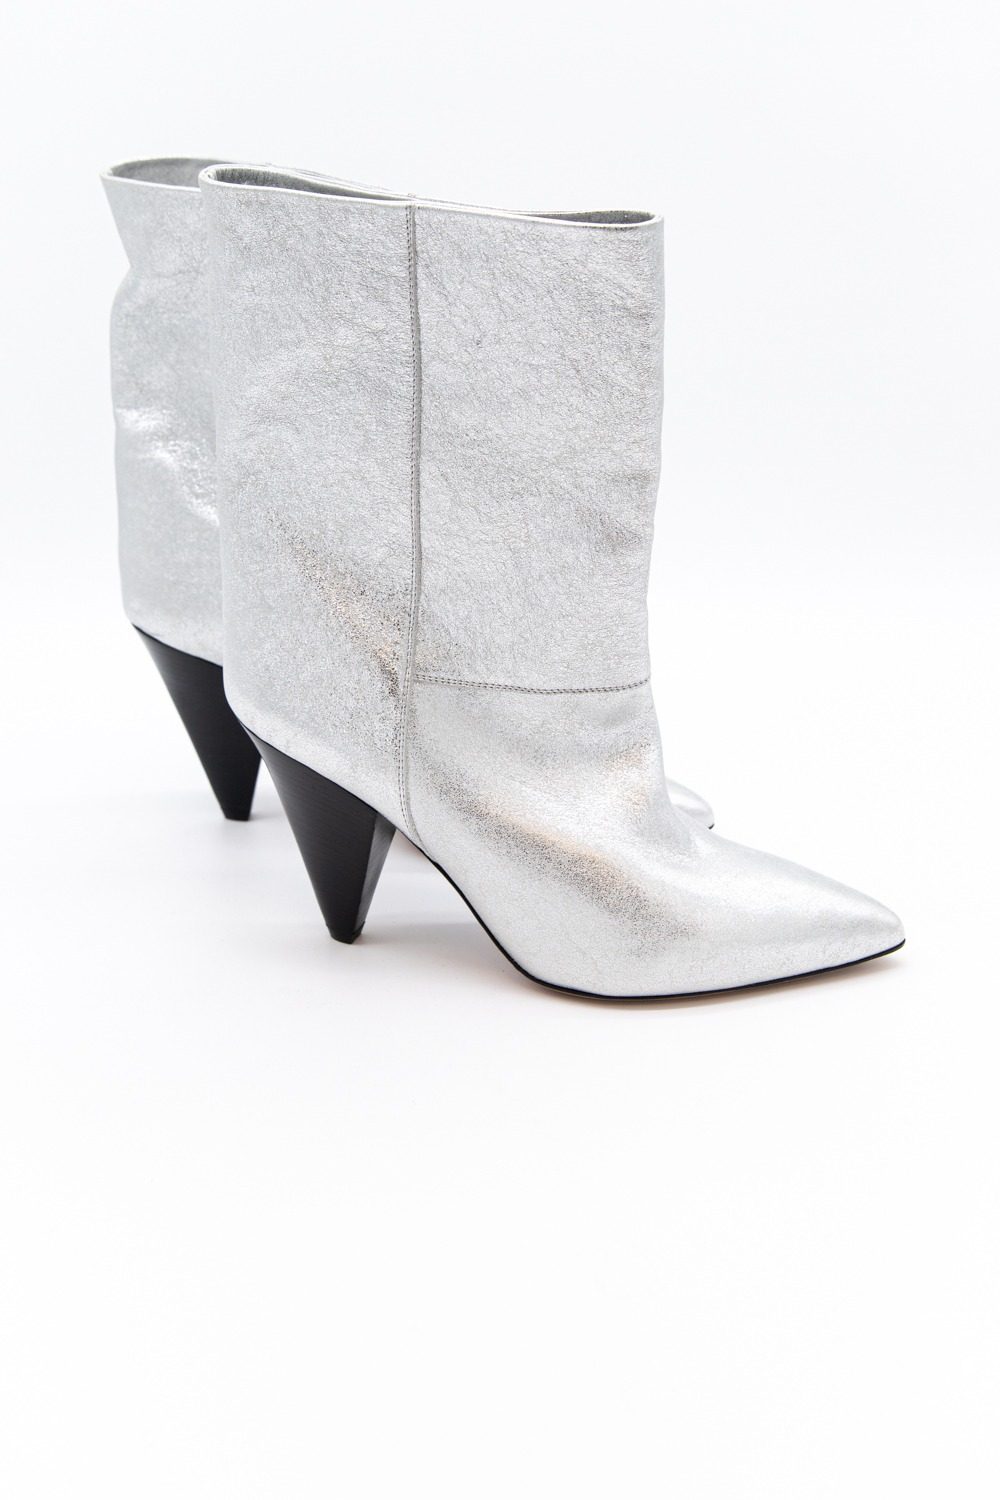 Thumbnail of http://Isabel%20Marant%20Stiefeletten%20in%20Silber